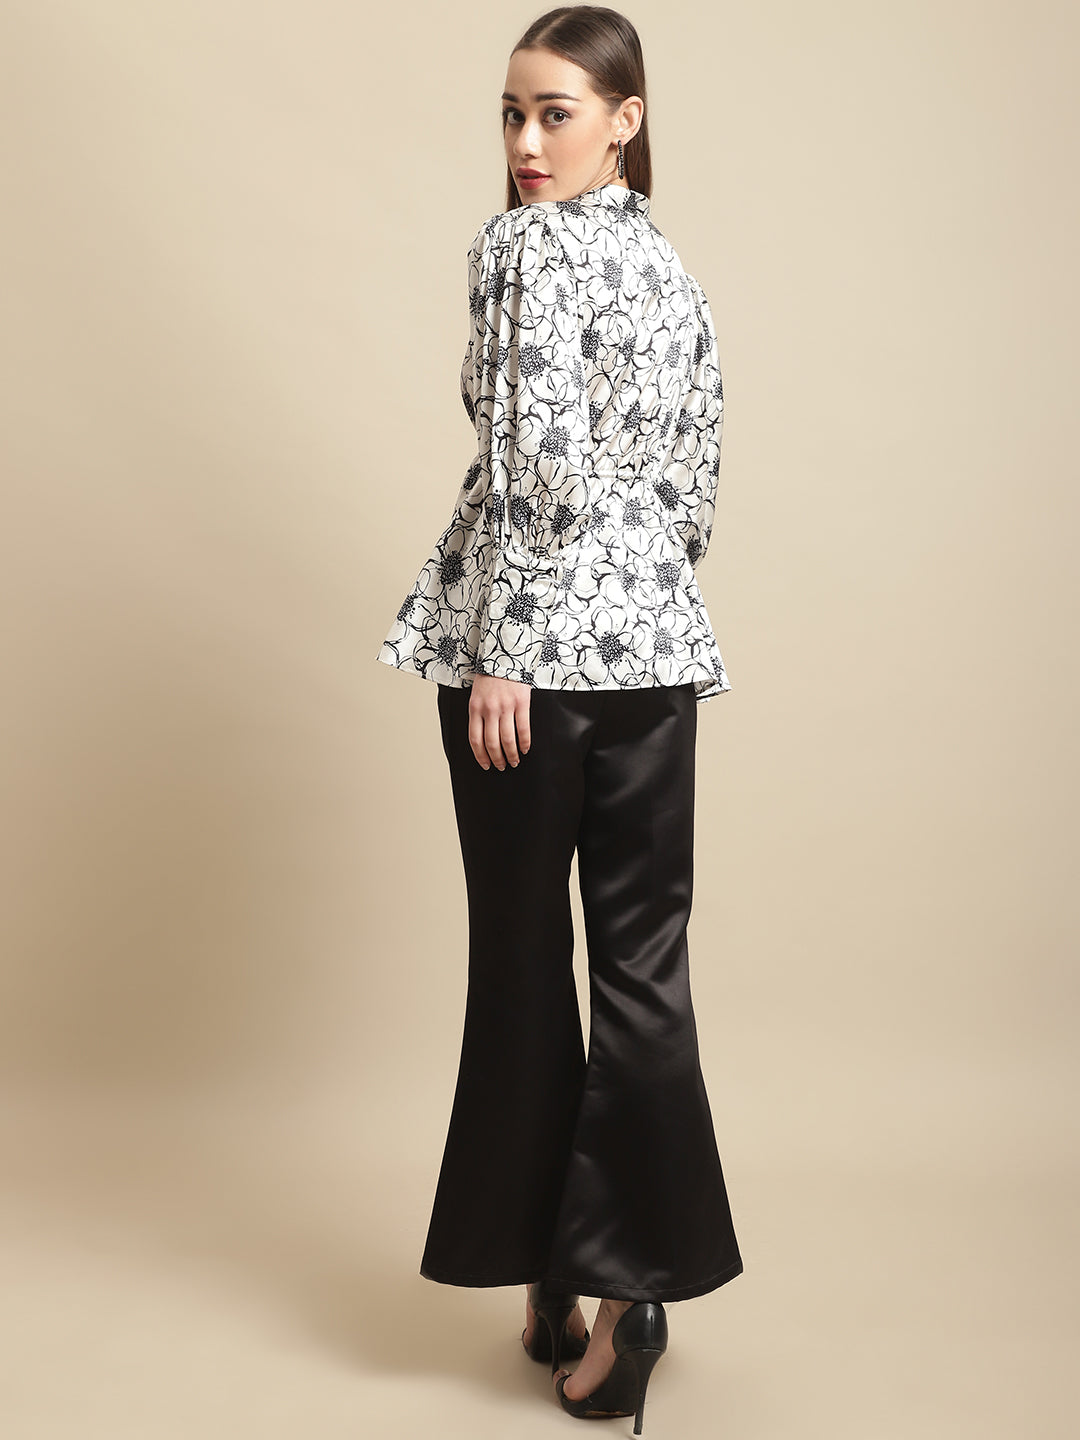 Blanc9 Bell Bottom Trouser With Flower Printed Top Co-Ord Set-B9ST97